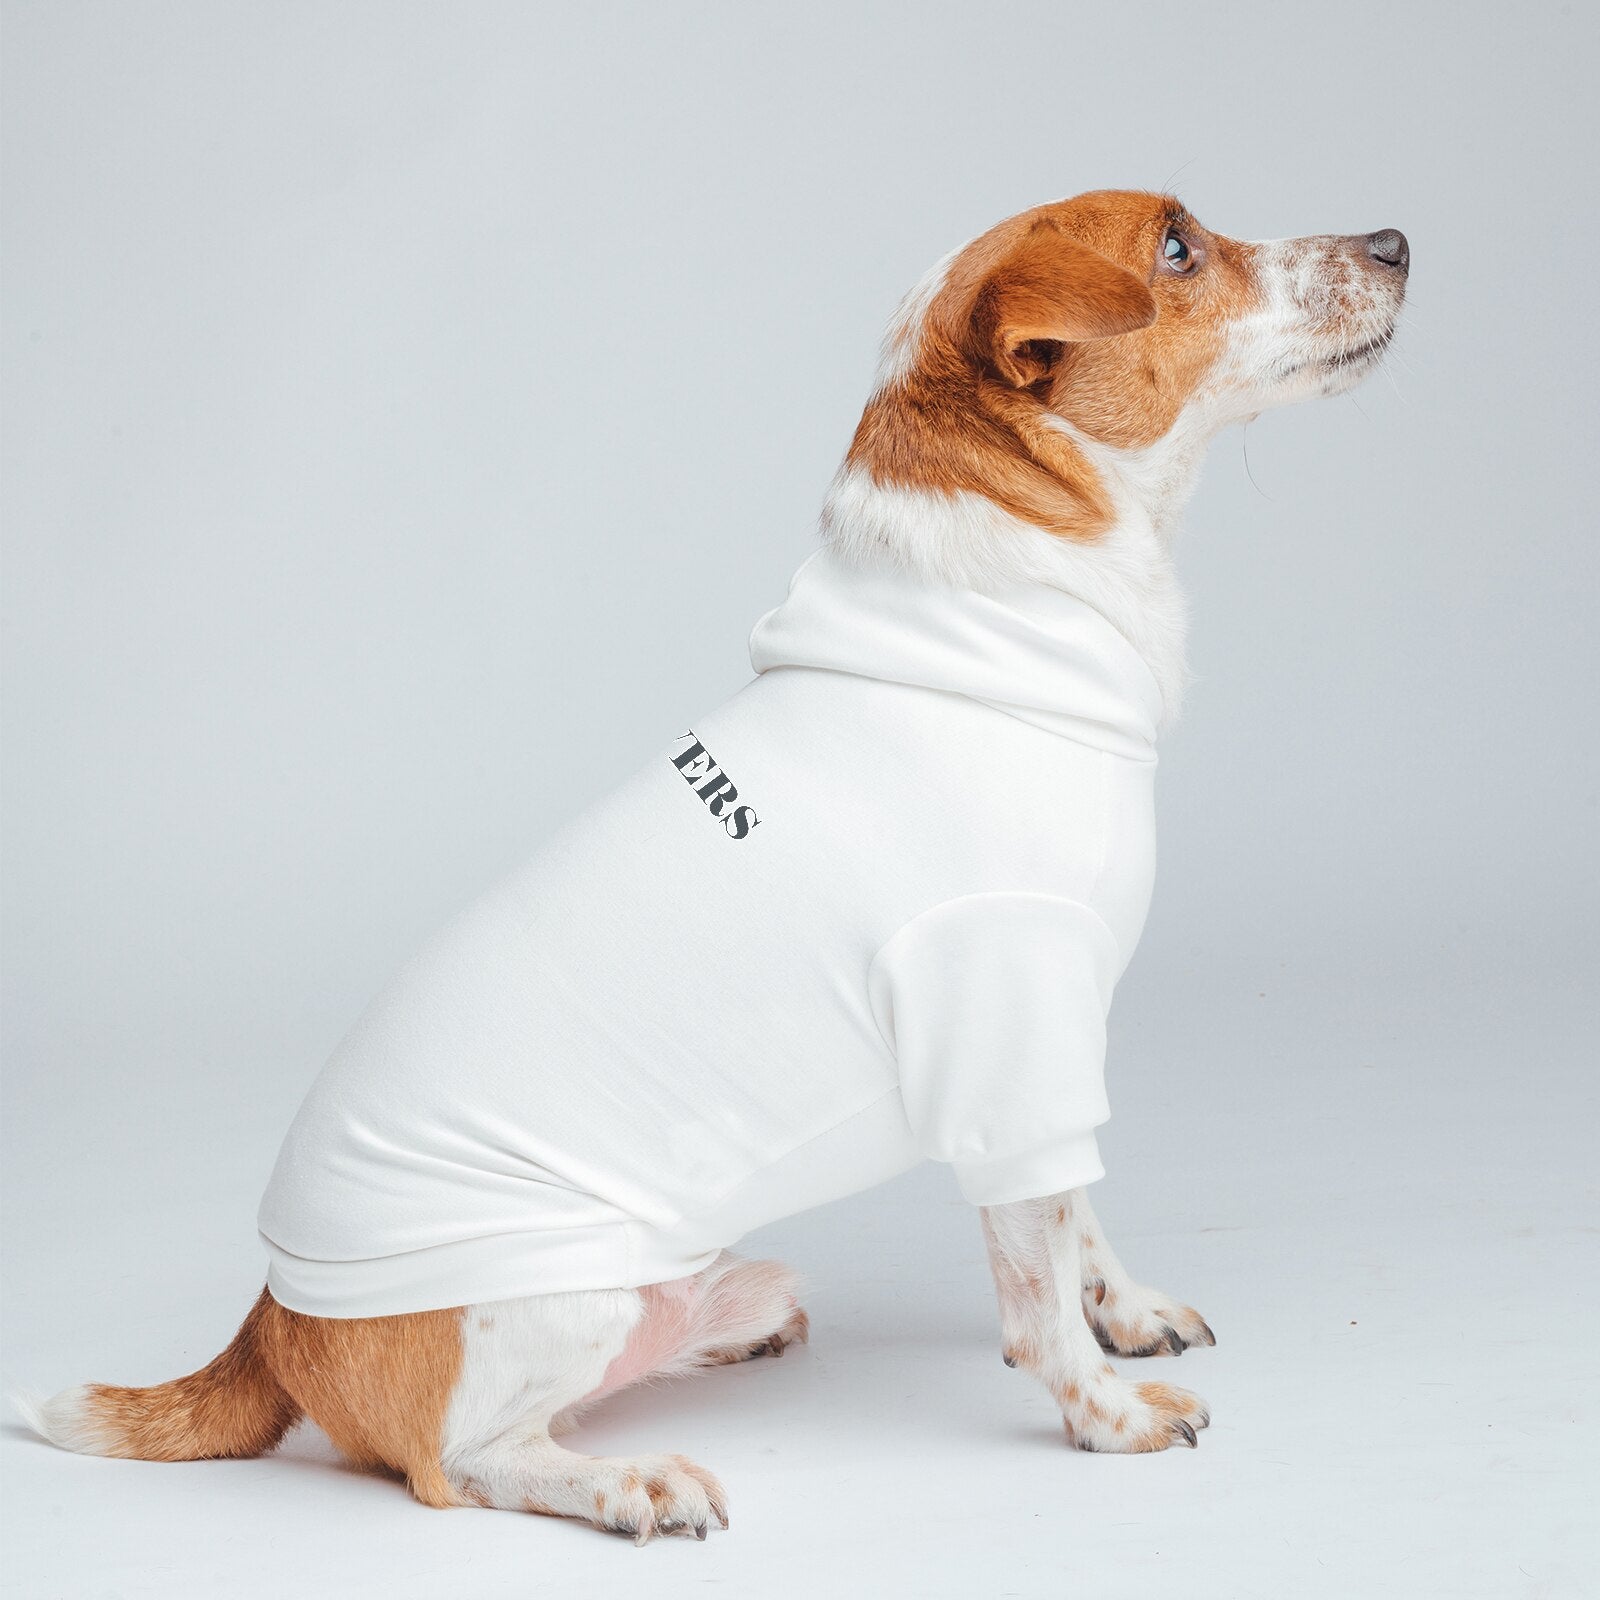 Pet Clothes Hoodie Letter Printed with Leash Hole, Soft and Breathable Fabric and Cool Cute Design